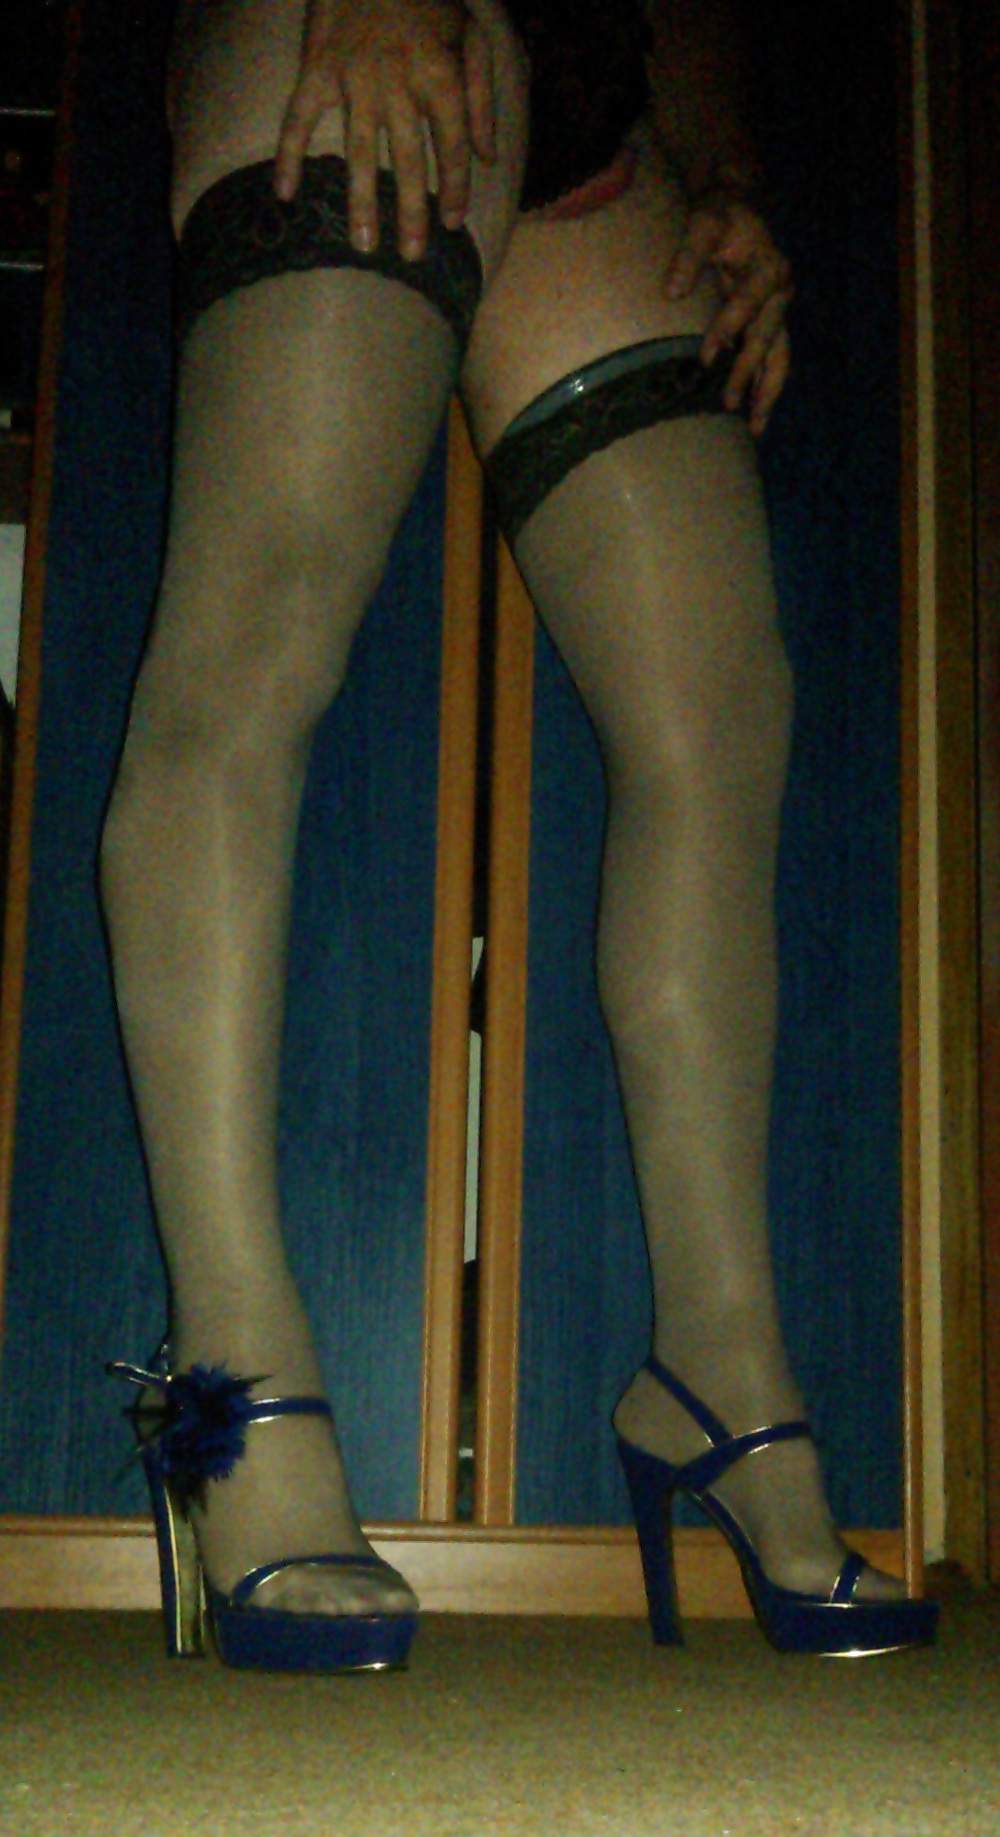 New heels and stockings #21819201